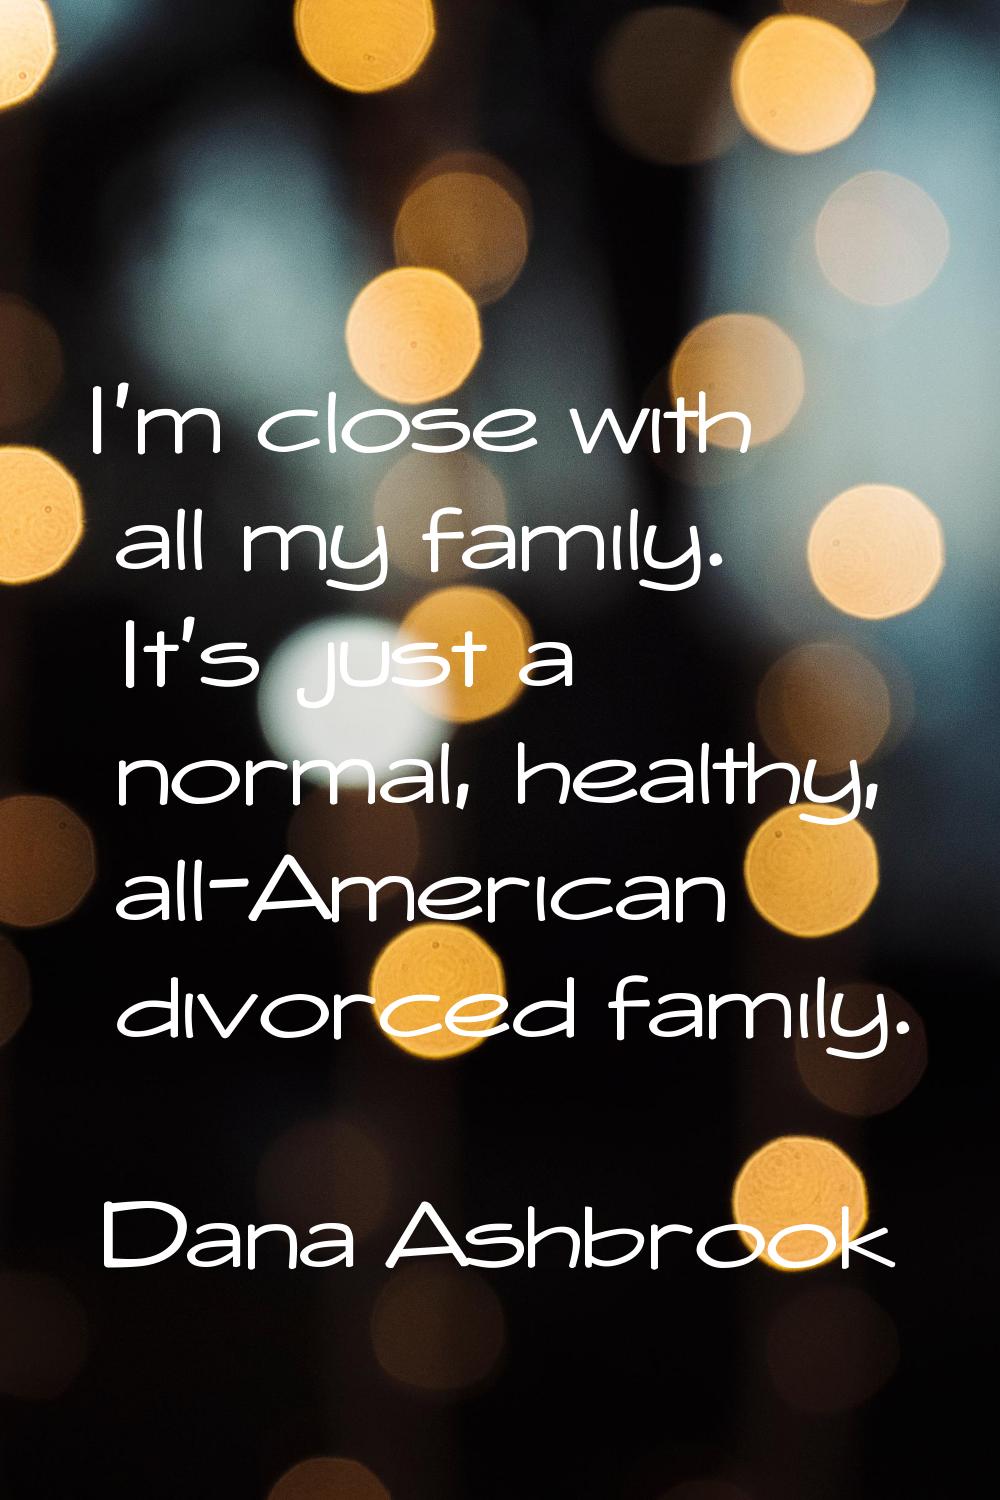 I'm close with all my family. It's just a normal, healthy, all-American divorced family.